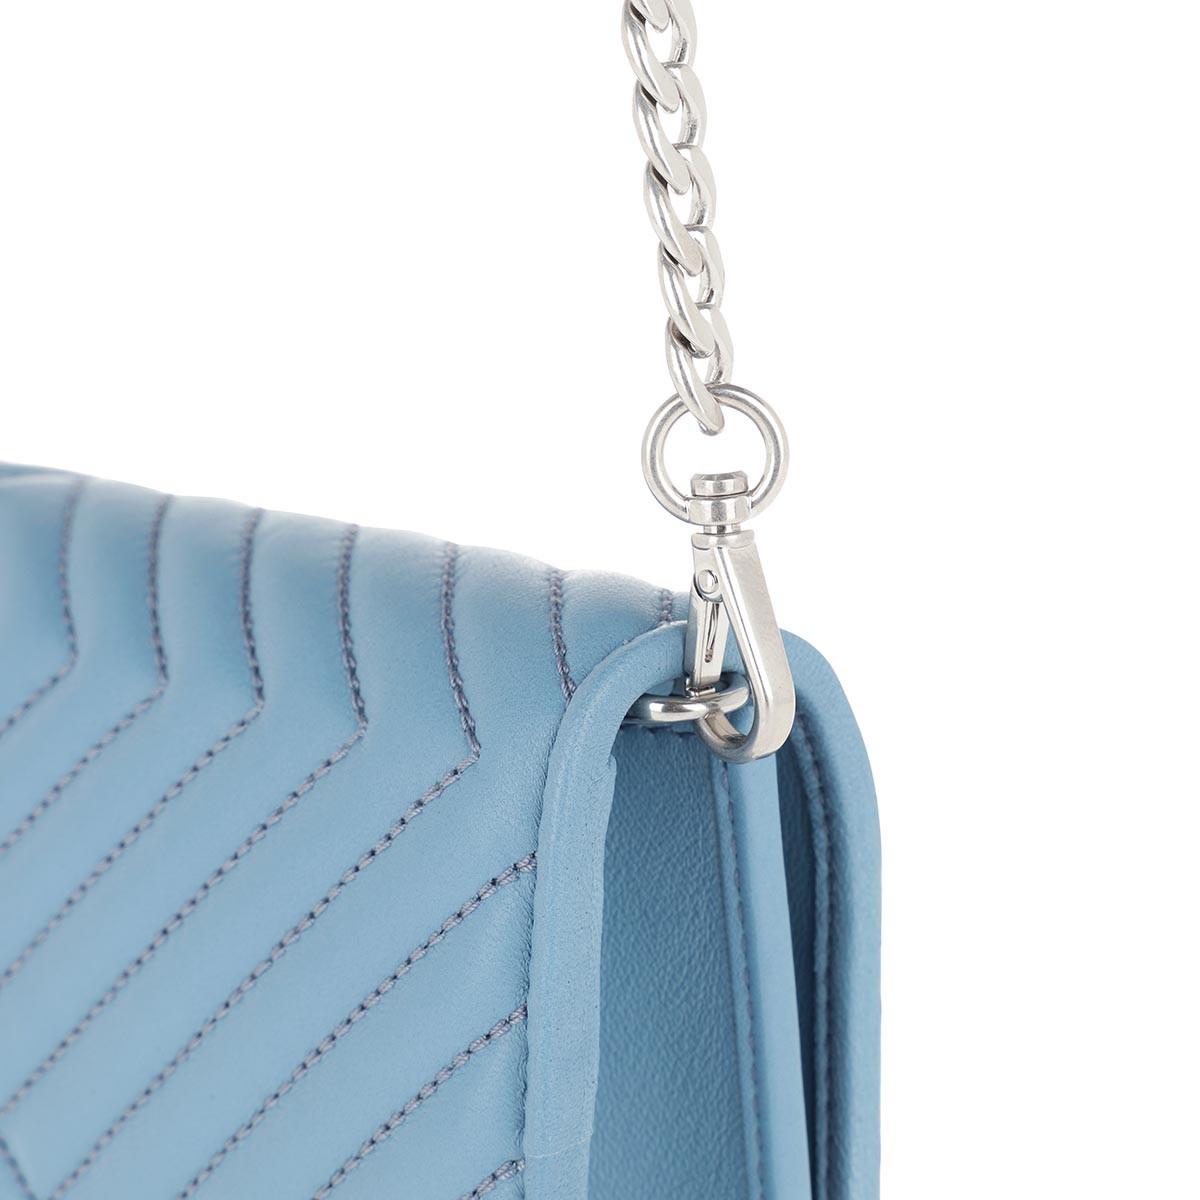 Prada Mini Crossbody Bag Quilted Leather Astrale in Blue - Lyst